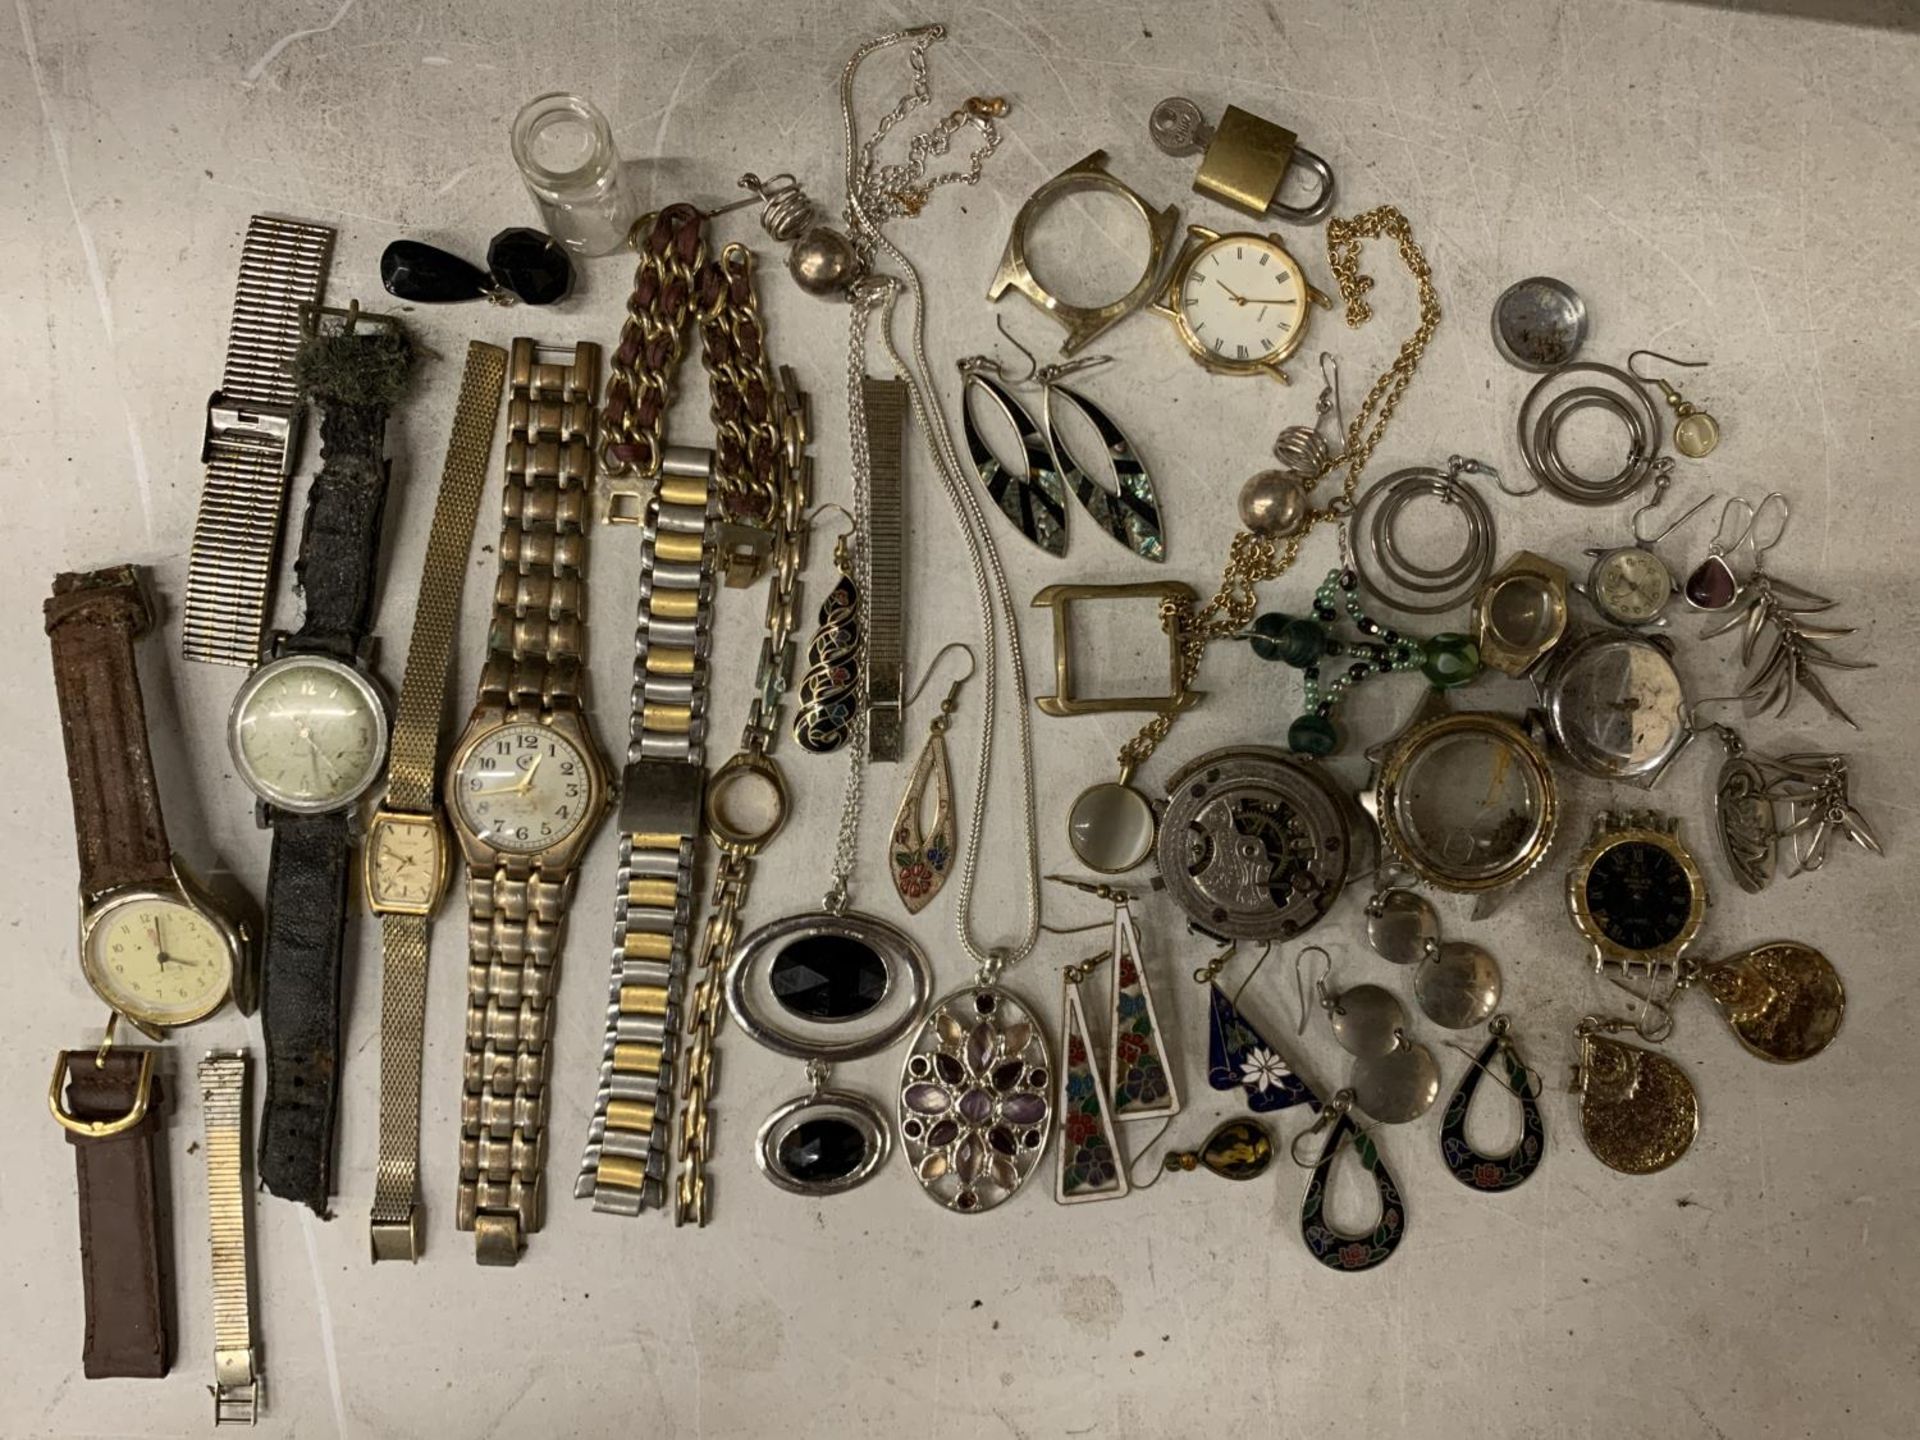 A MIXED LOT OF WATCH AND WATCH PARTS PLUS COSTUME JEWELLERY FOR RESTORATION